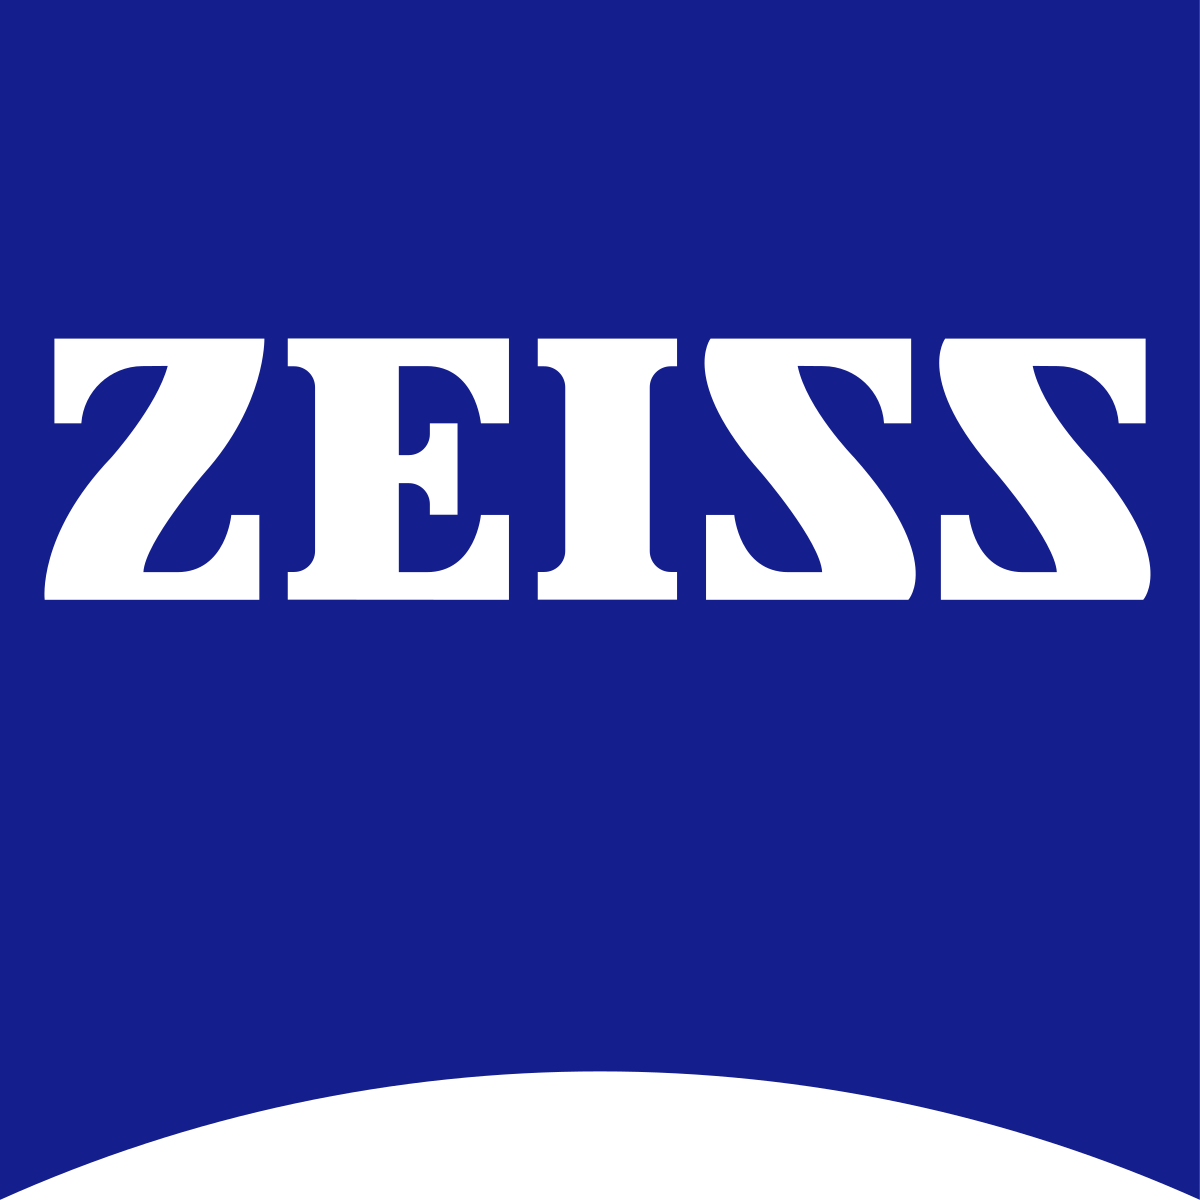 Zeiss_logo.svg.png